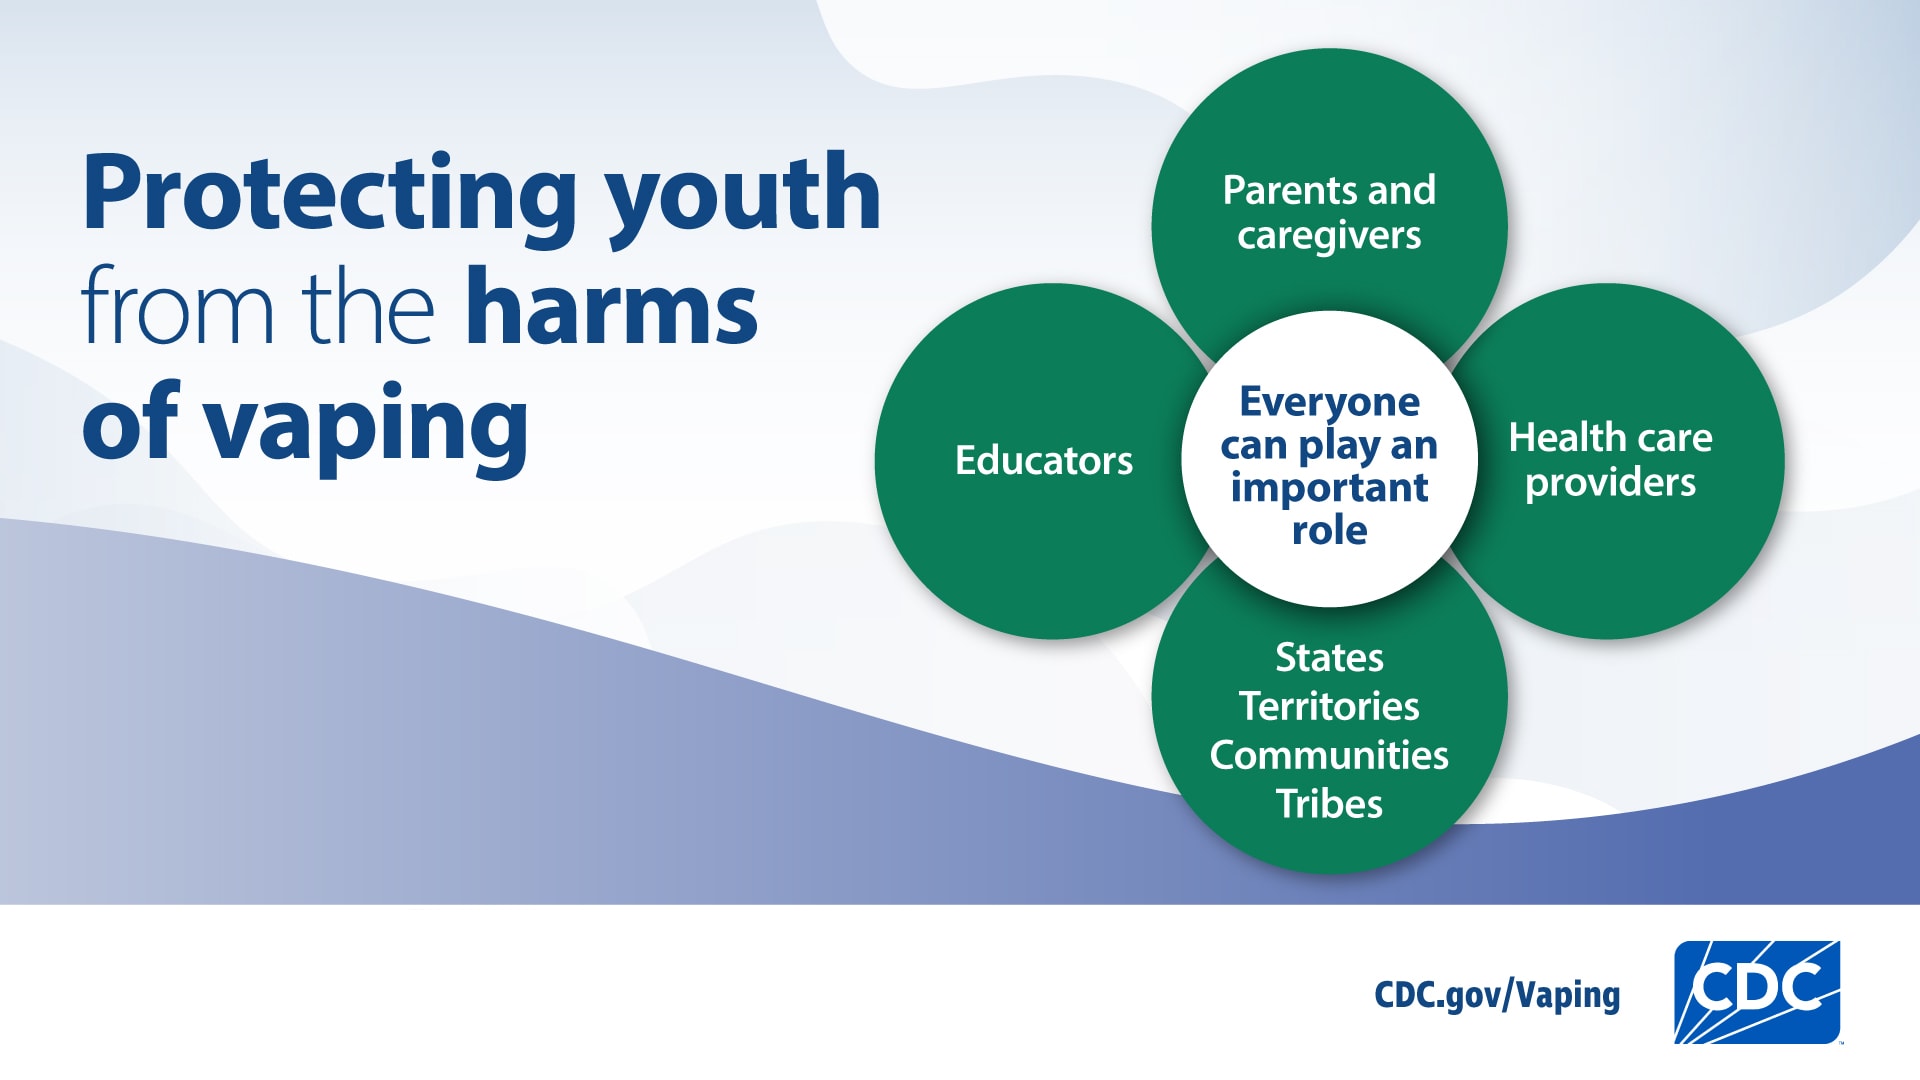 Visual depiction of different groups who can help protect youth from the harms of vaping